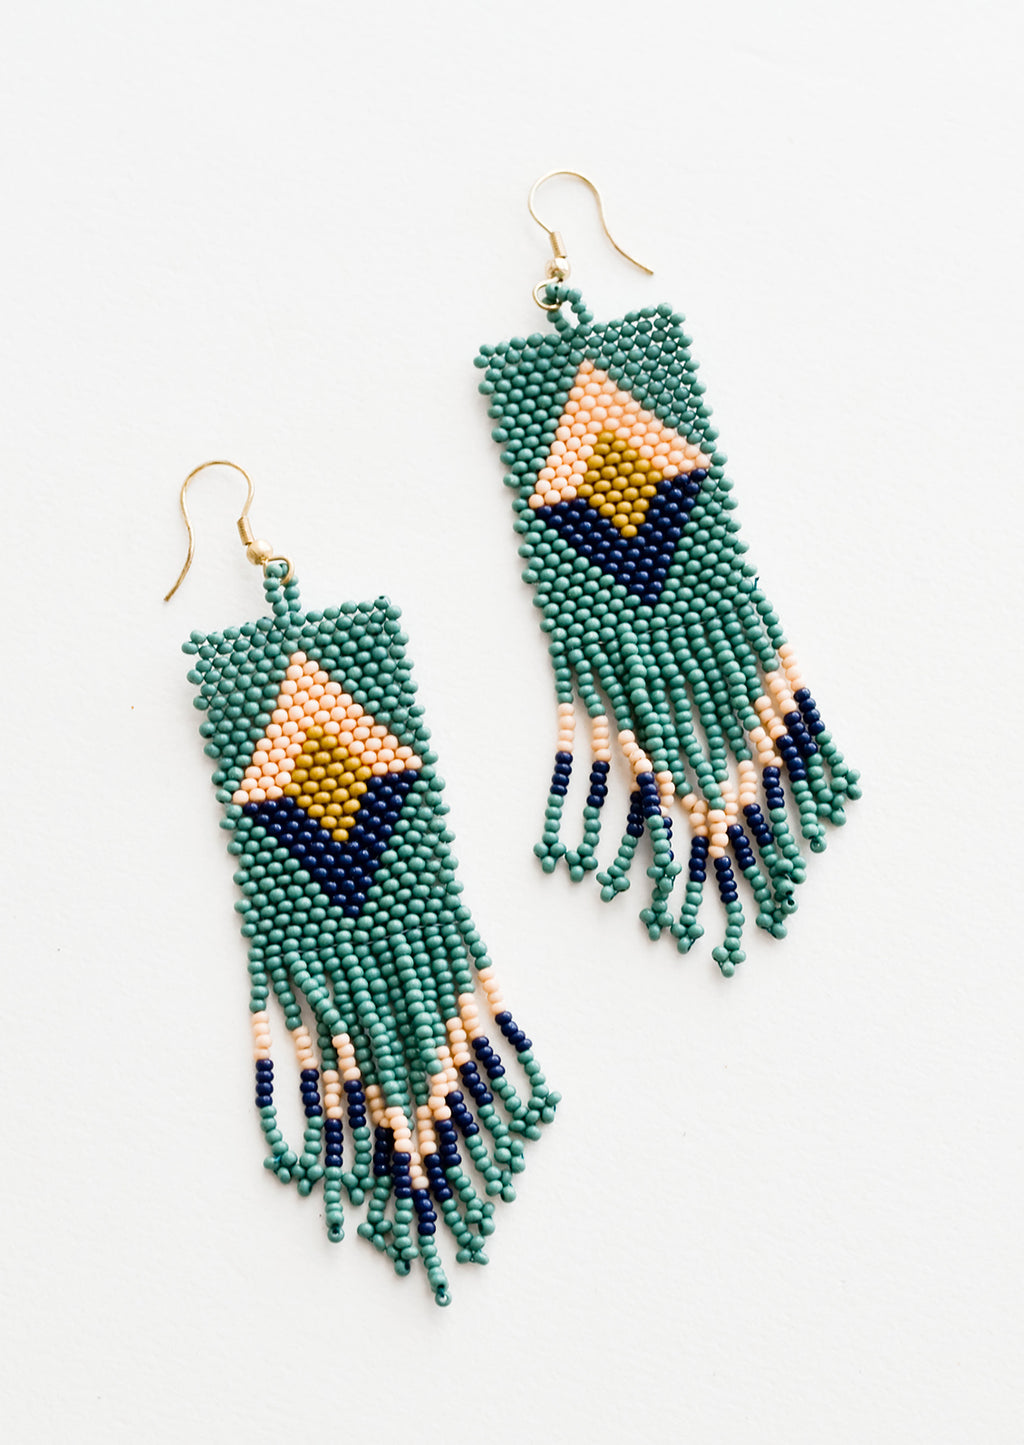 Teal / Pink / Citron: Teal beaded fringe earrings with pink and navy diamond design.